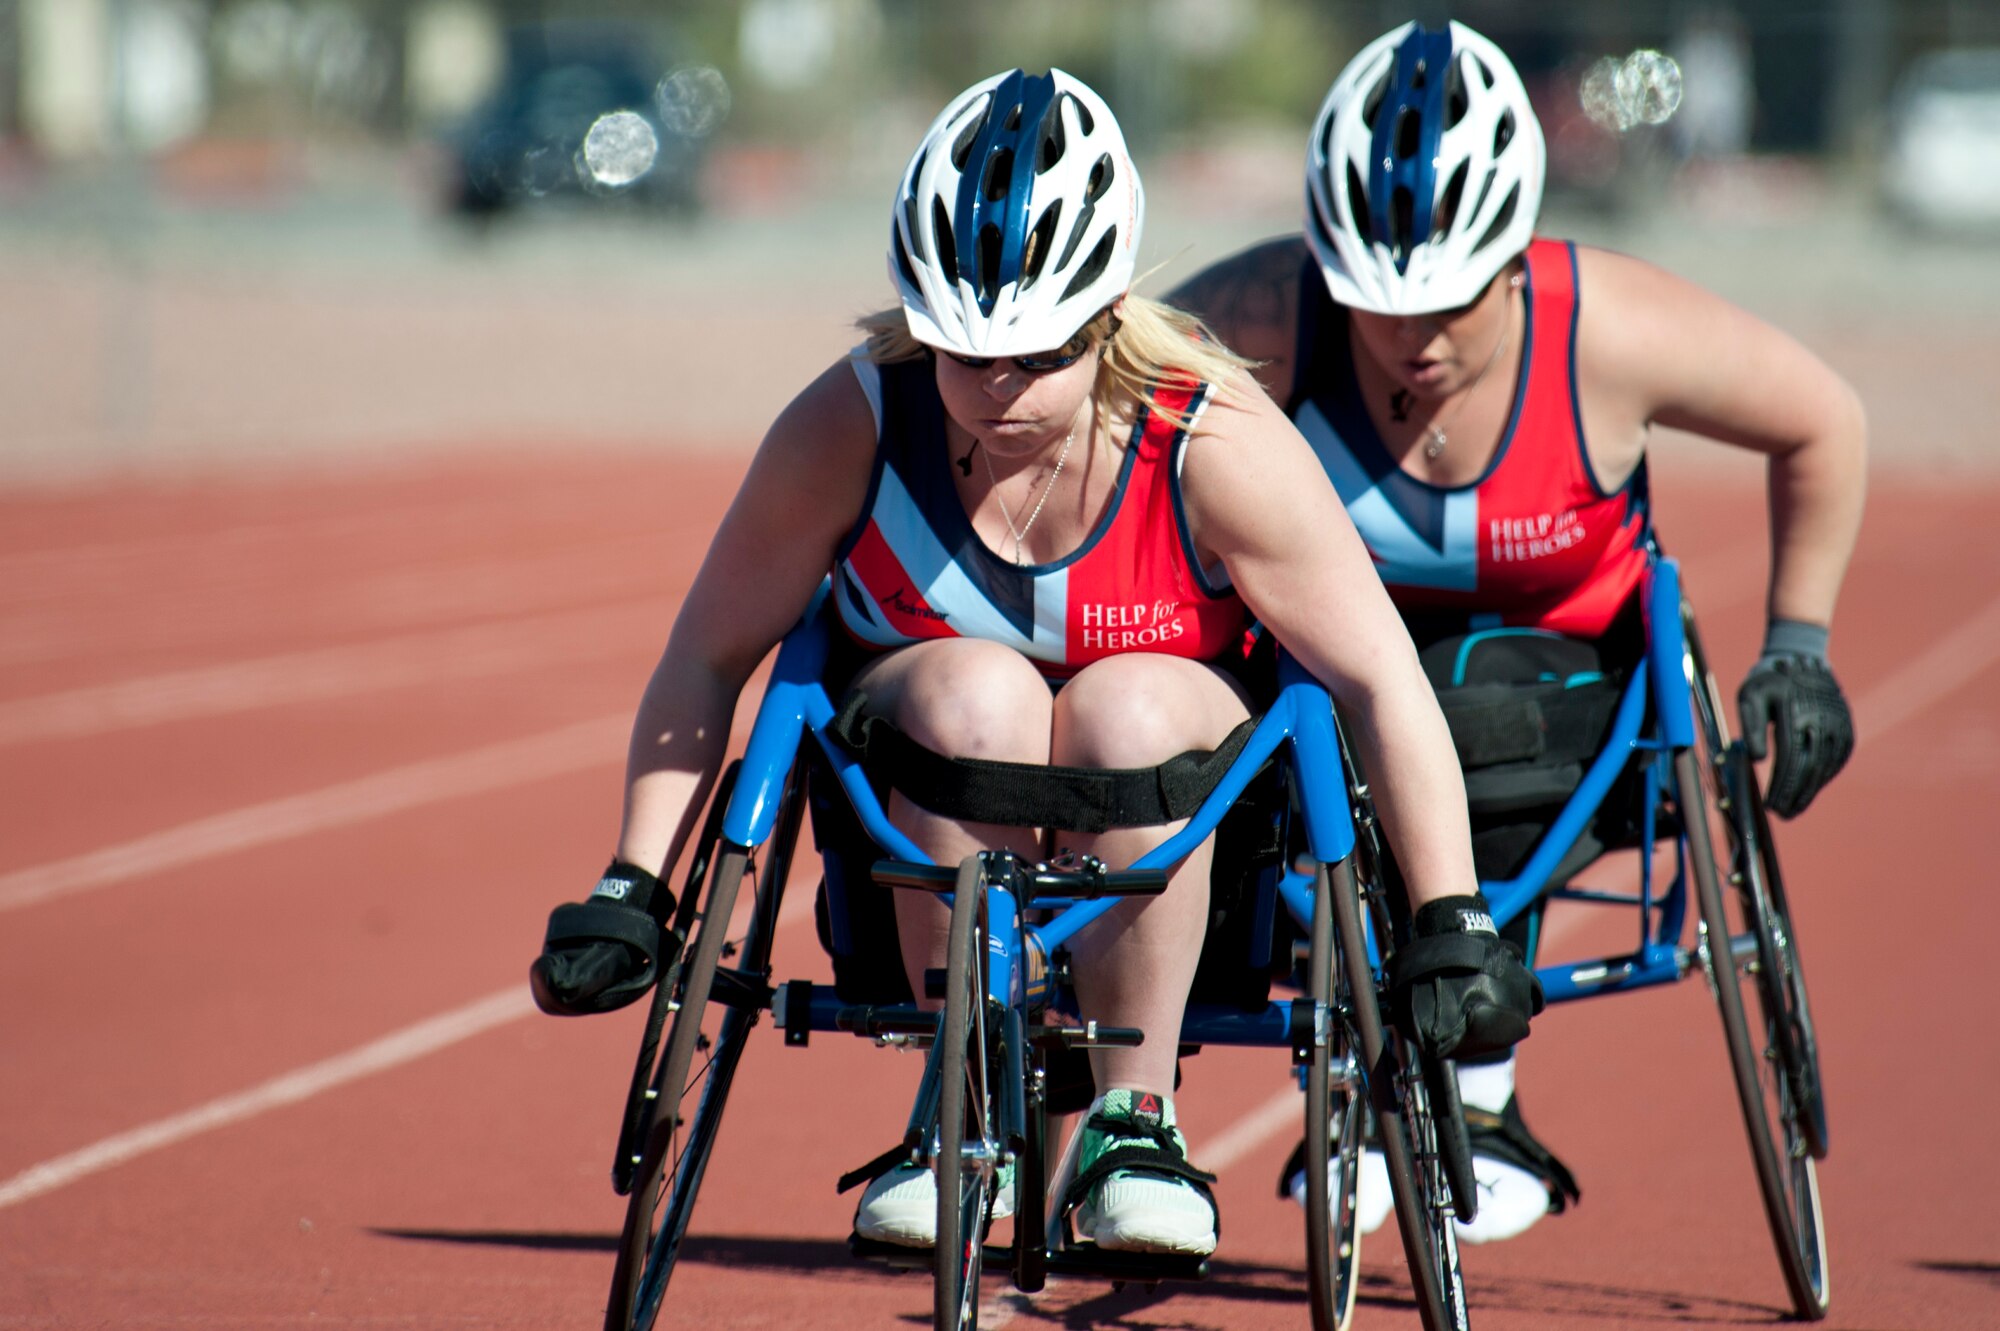 Anna Pollock leads Carolyne Dufley, both 2015 Help for Heroes track team members, at Nellis Air Force Base, Nev., March 3, 2015. Dufley later retook the lead to finish in first place at the end of the women’s 1500 meter wheelchair race. (U.S. Air Force photo by Senior Airman Timothy Young)